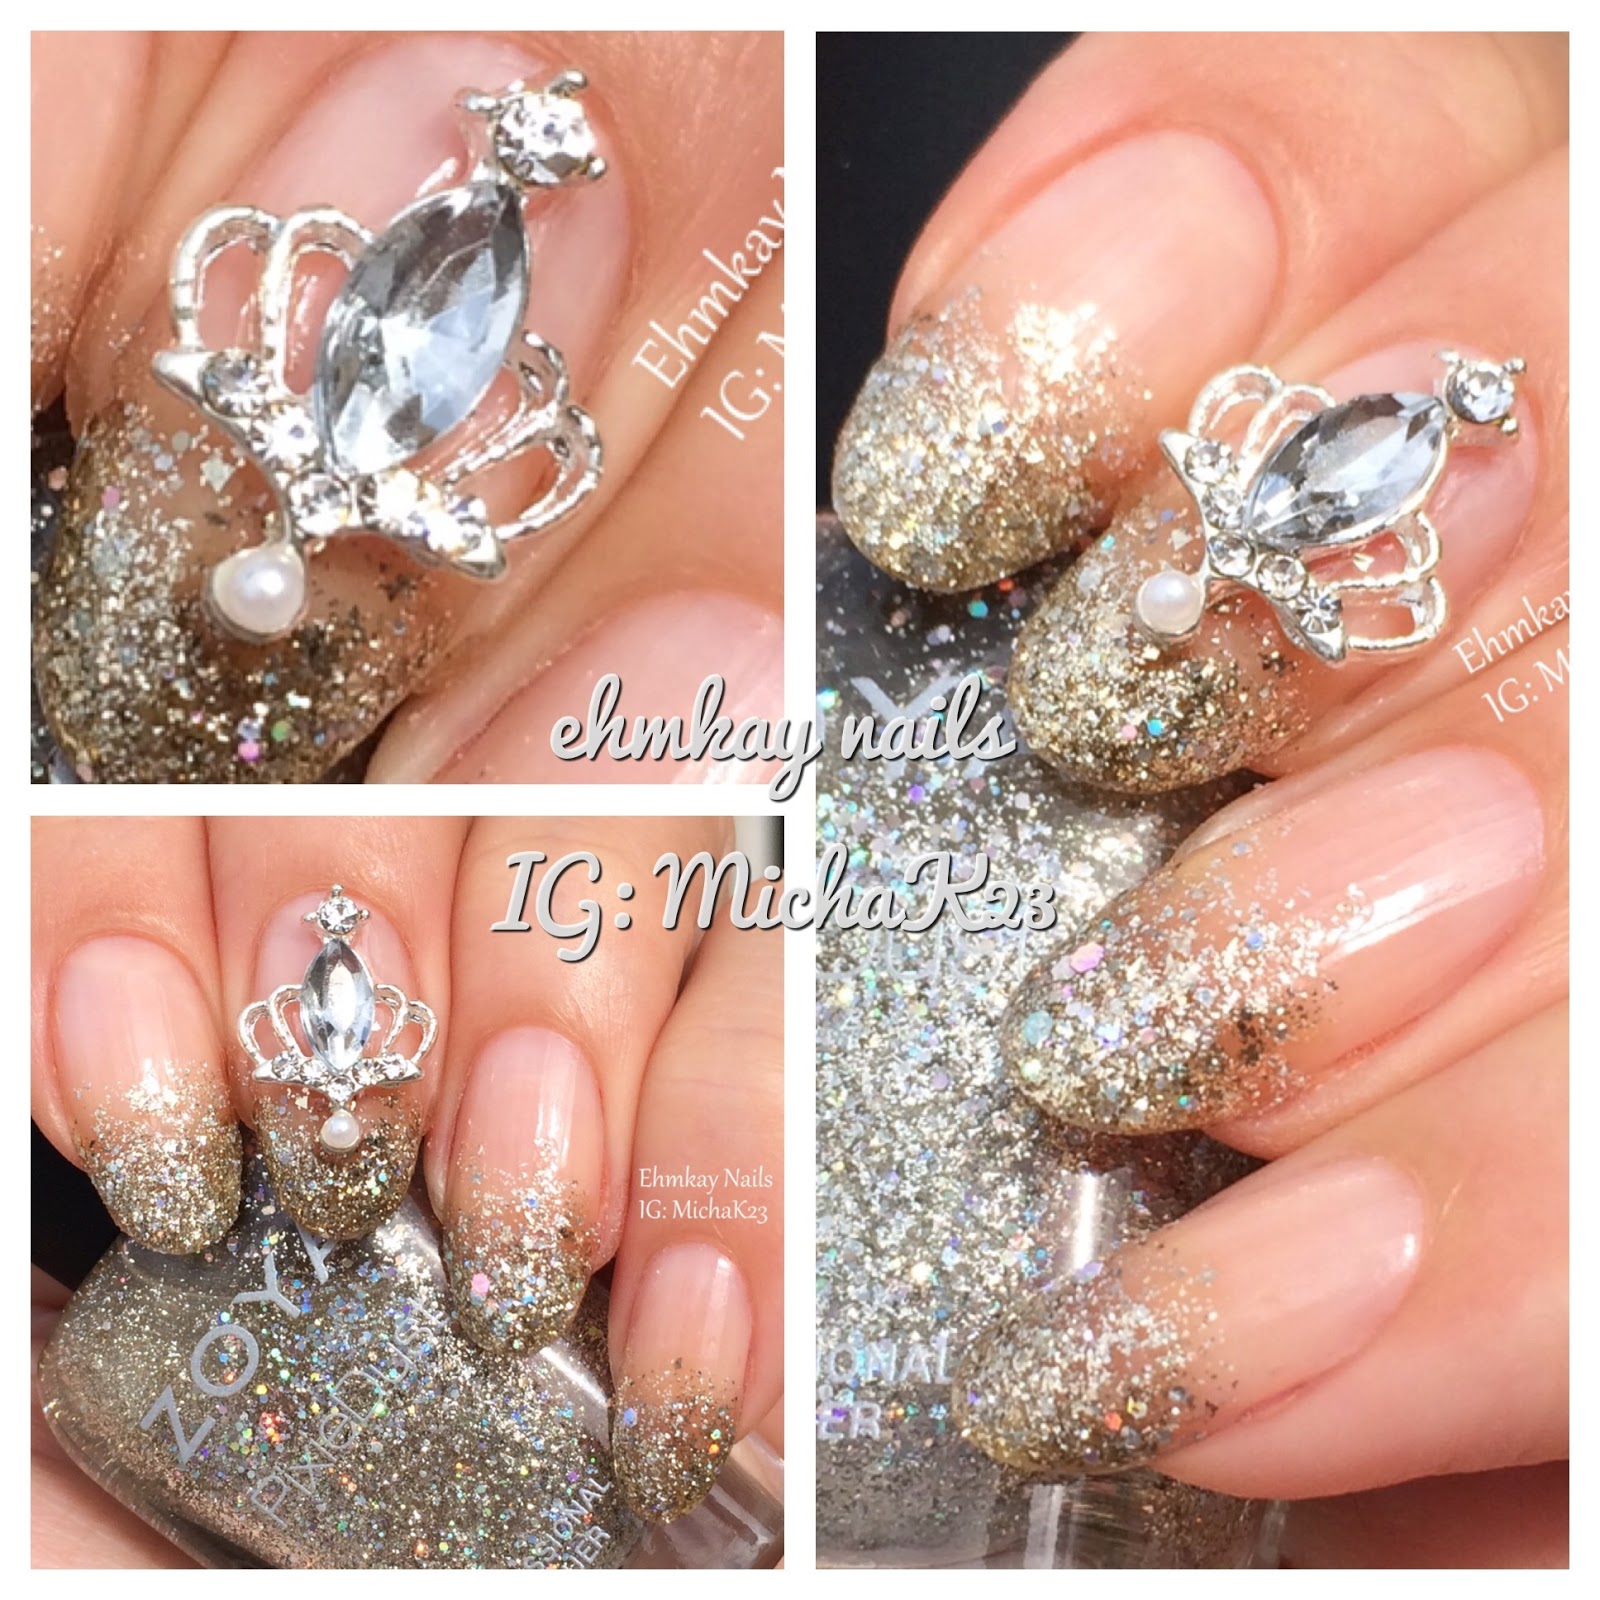 ehmkay nails: Lady Queen Nail Jewelry: Queen's Crown